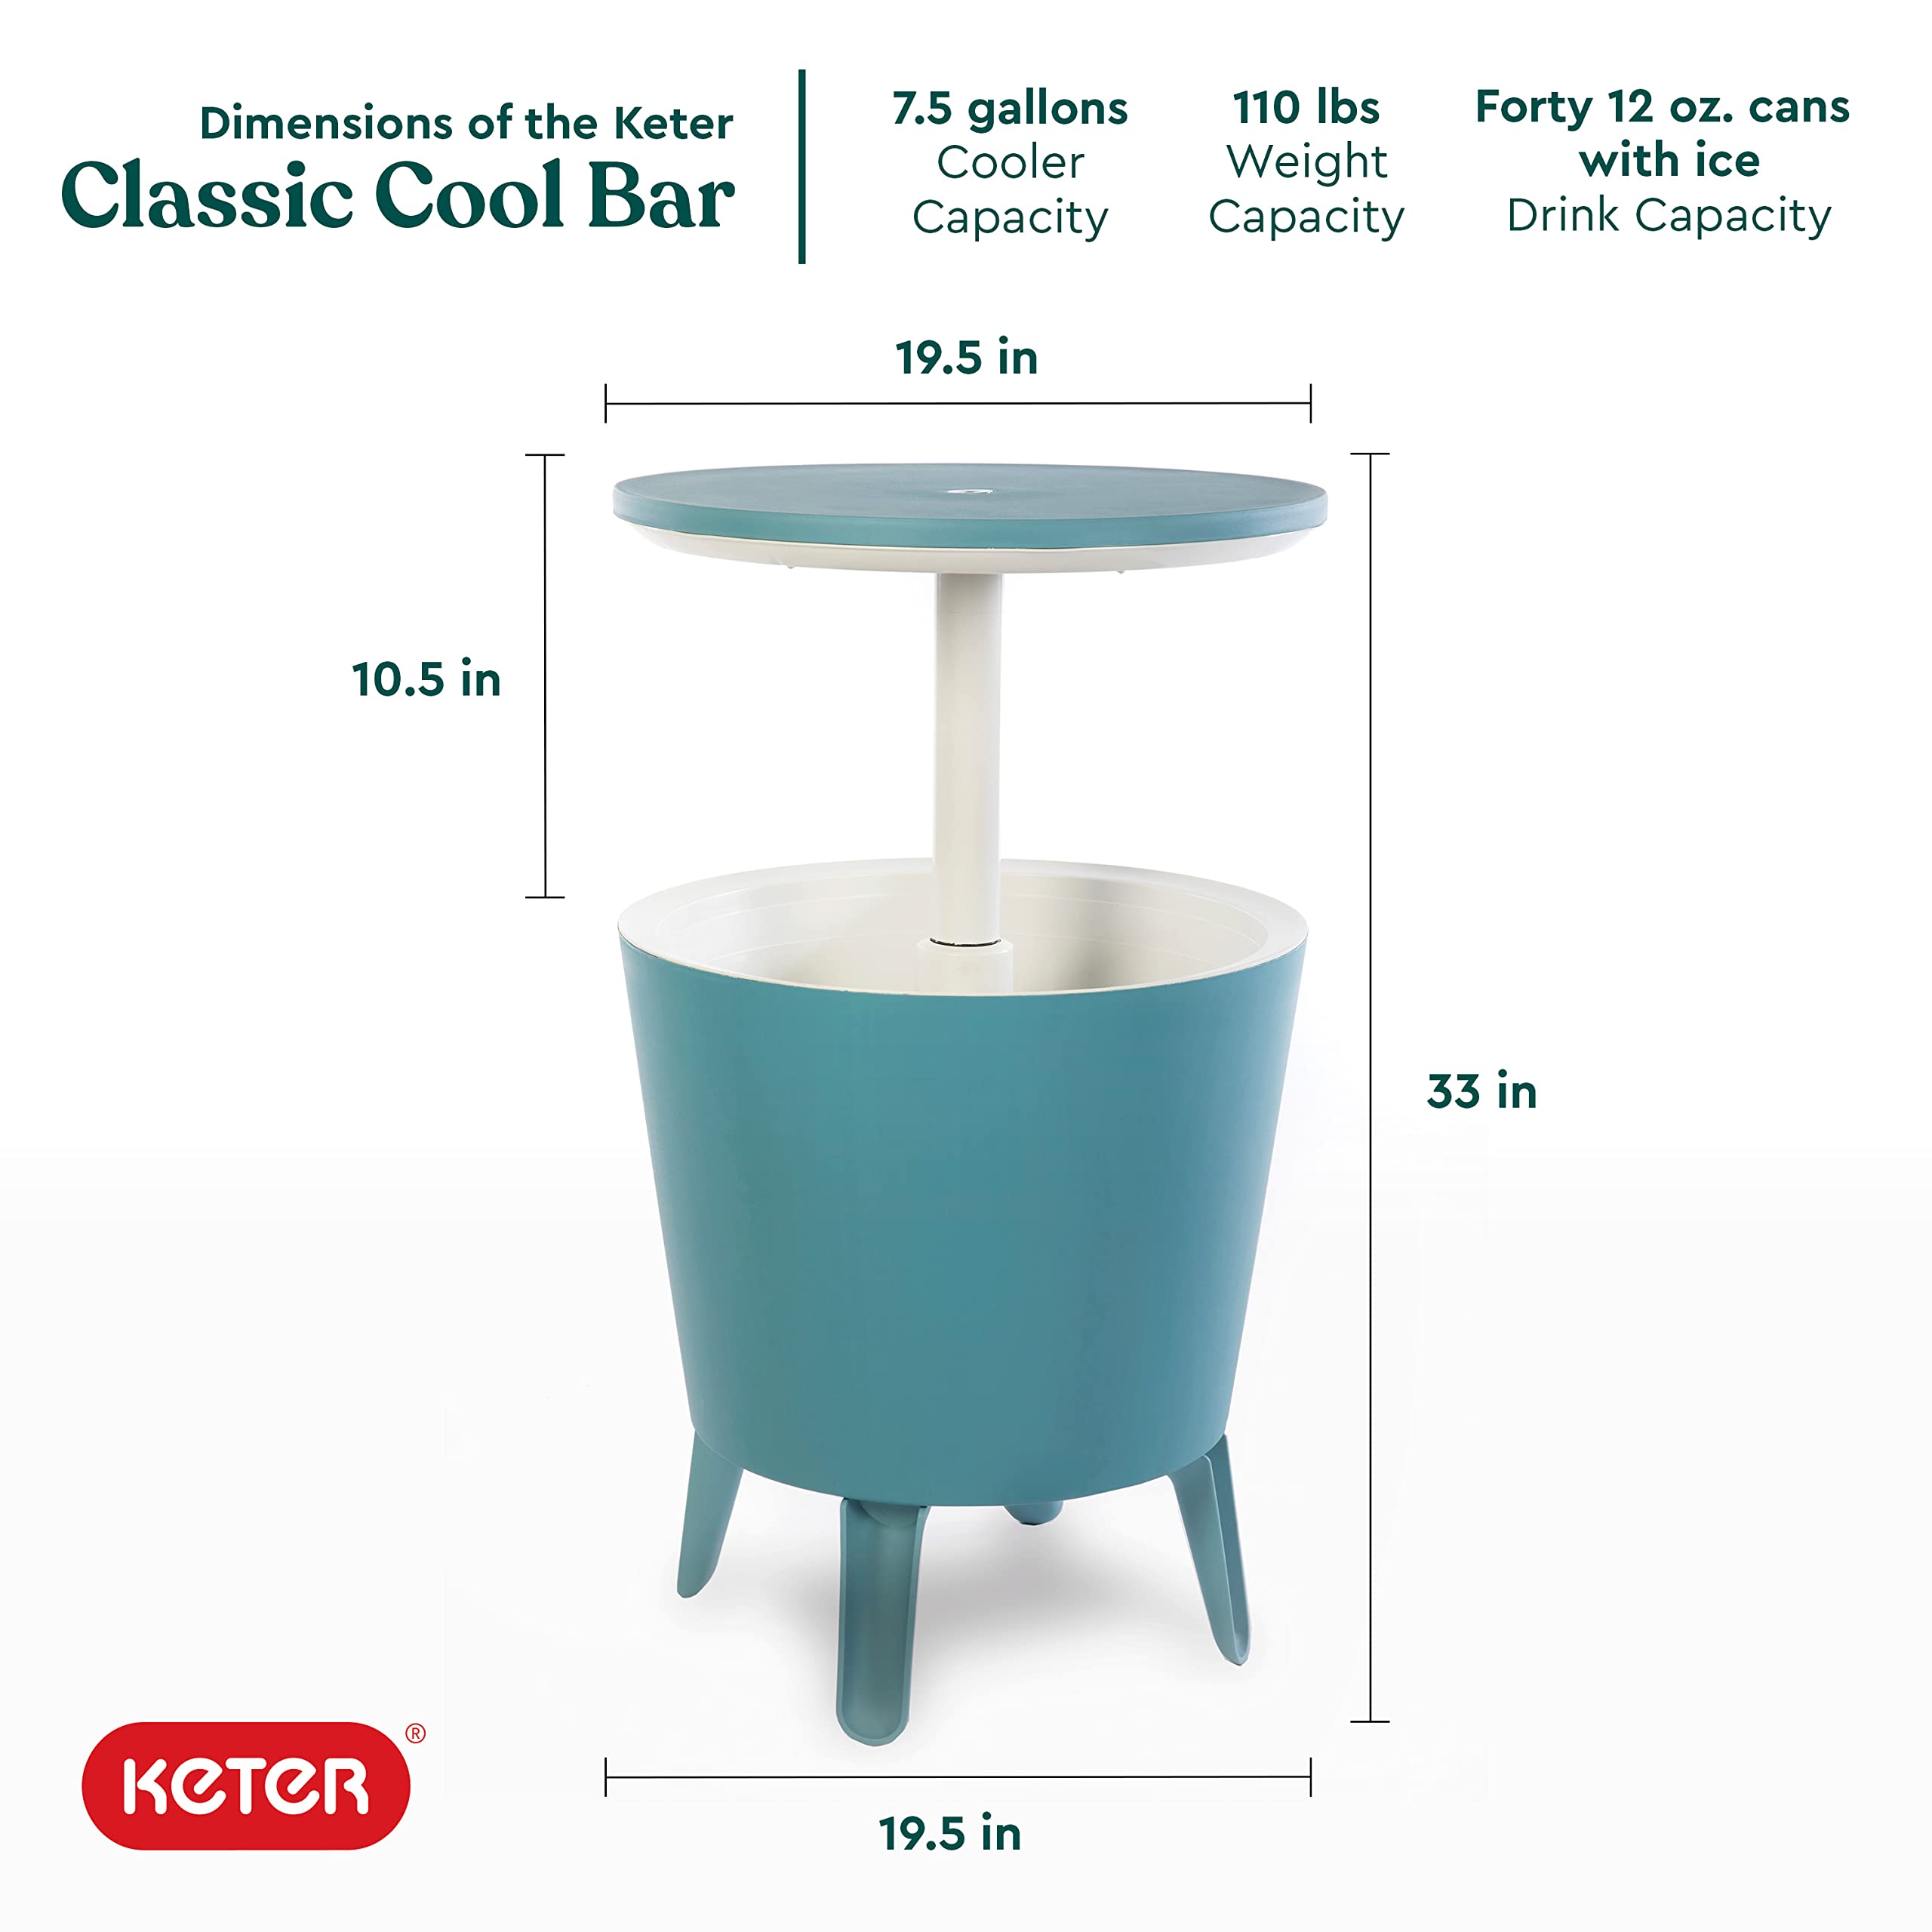 Keter Modern Cool Bar Outdoor Patio Furniture and Hot Tub Side Table with 7.5 Gallon Beer and Wine Cooler, Teal